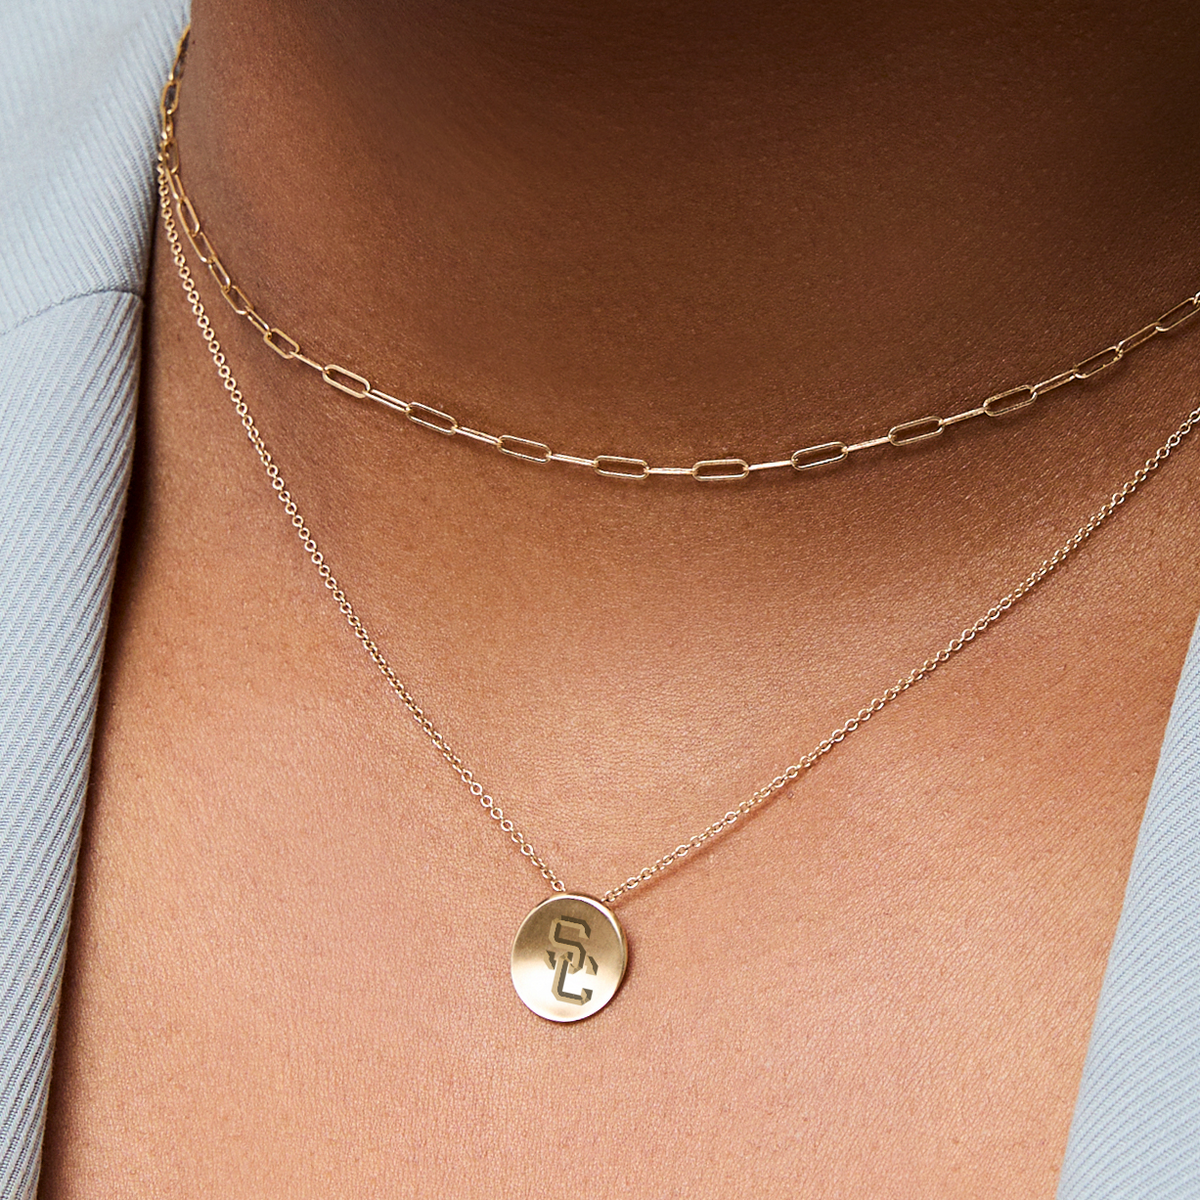 USC SC Organic Petite Necklace shown on figure in gold